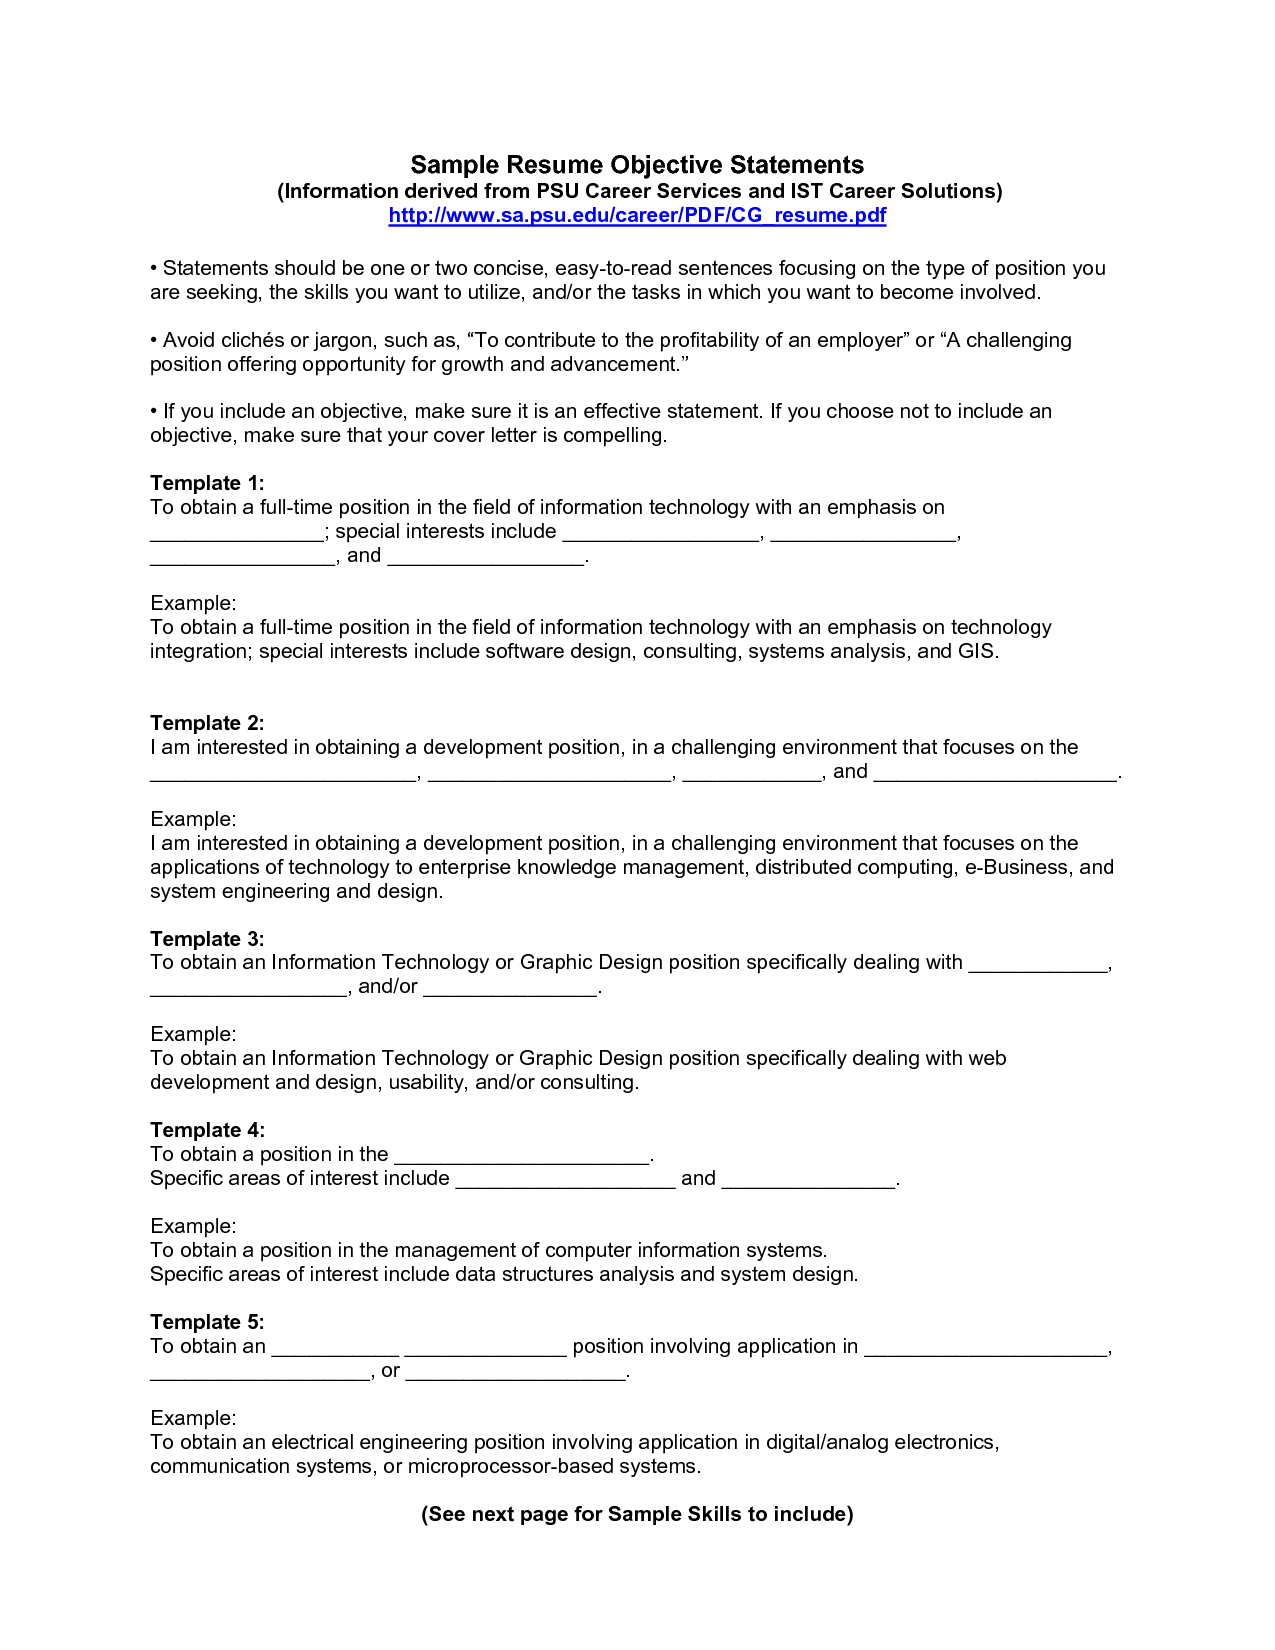 Resume building objective statement